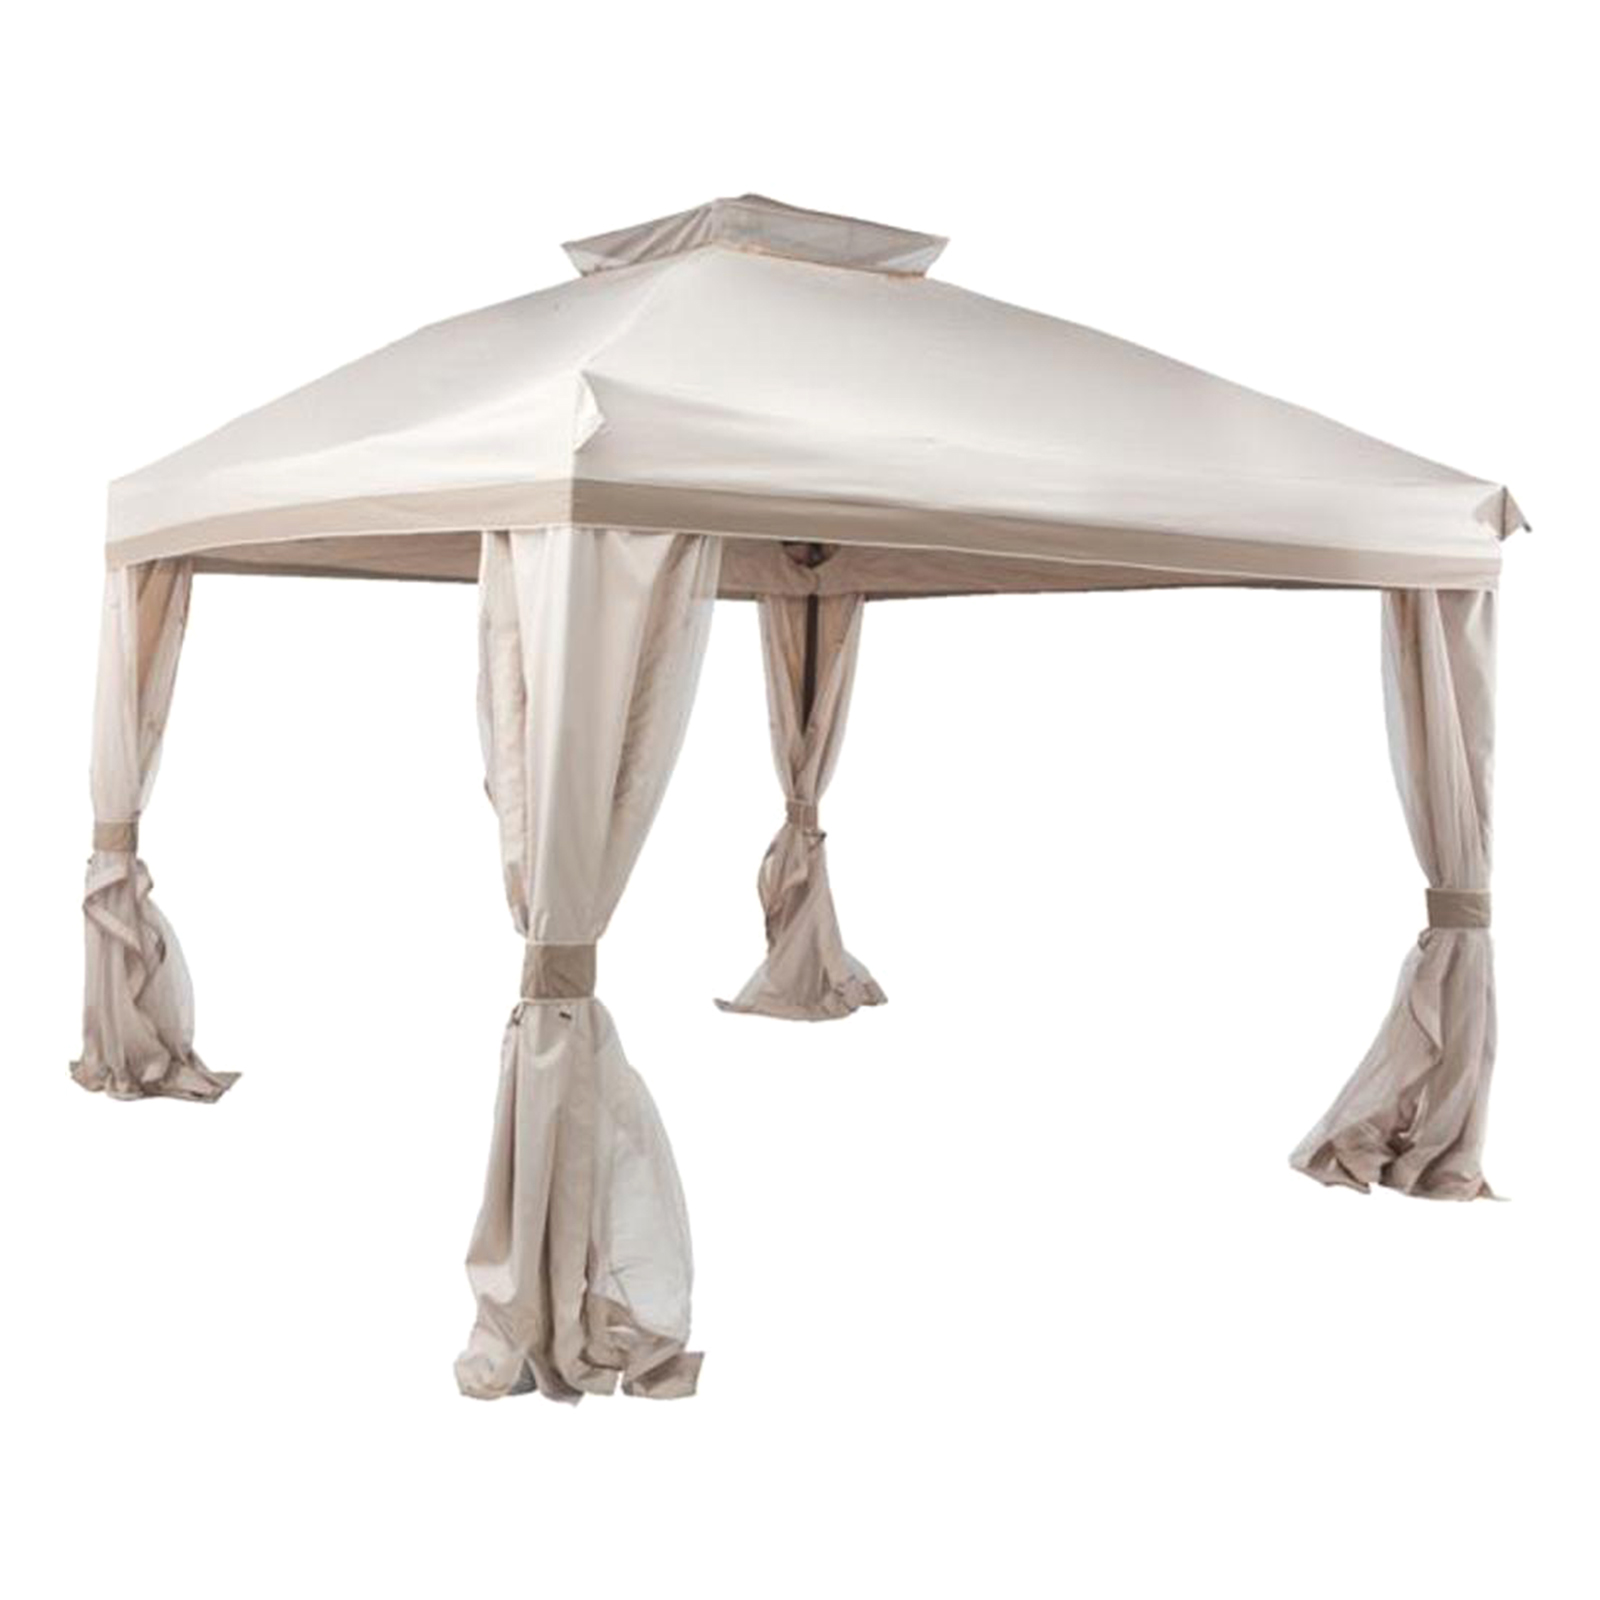 Pacific Casual - JSZ 10' x 10' Pitched Roof Style Gazebo